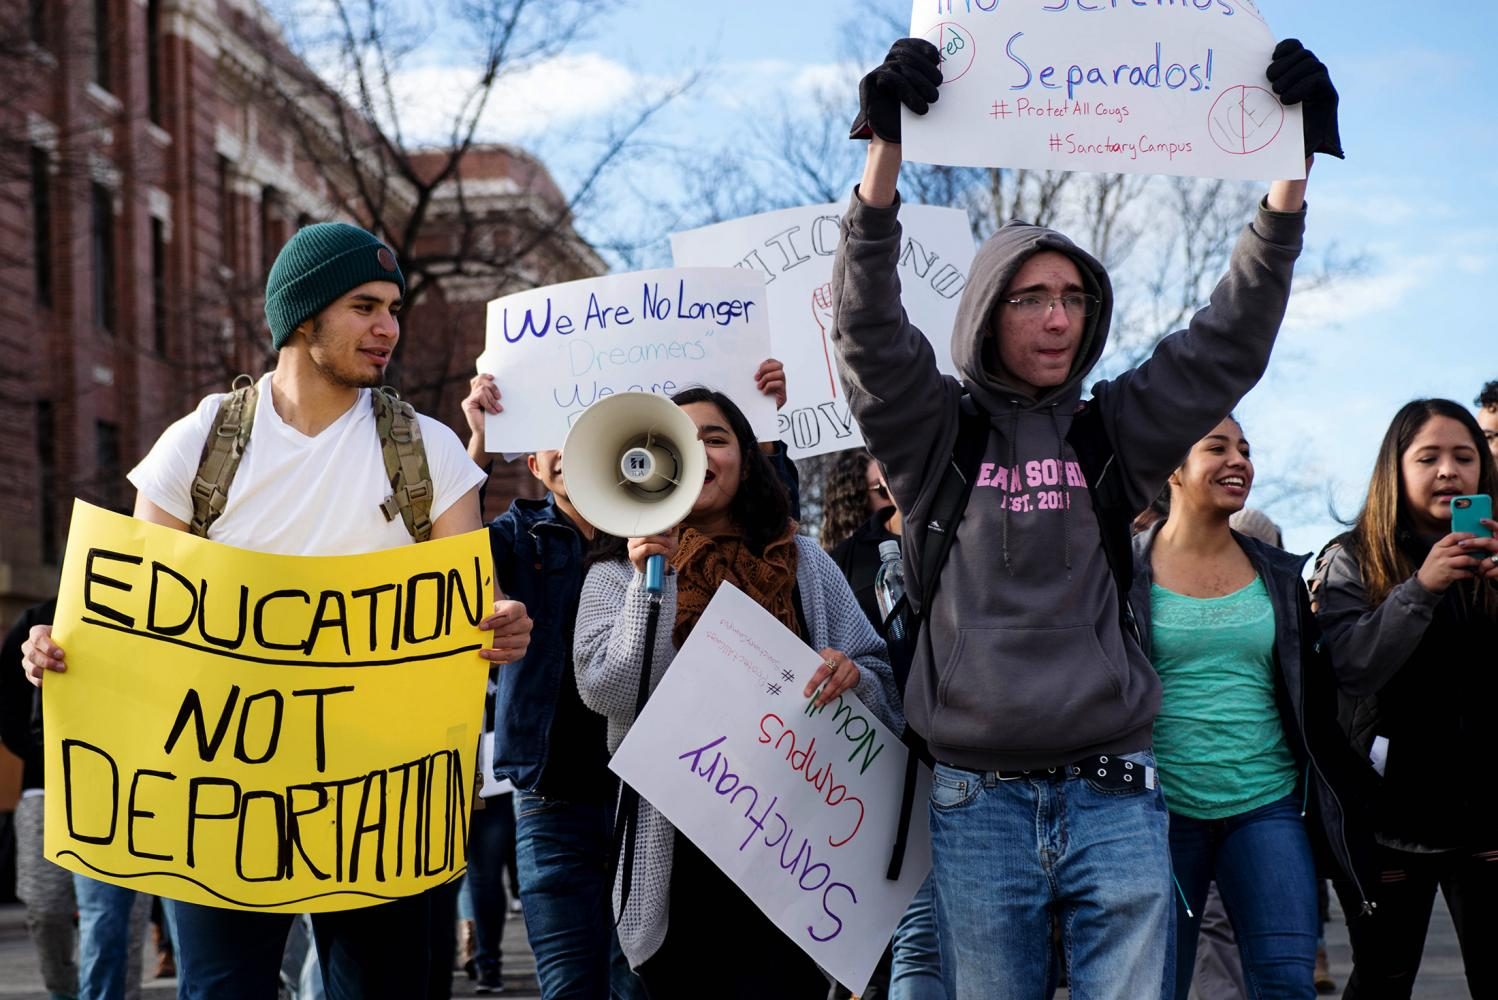 From left to right:  Eduardo Castañeda Díaz, Keyla Palominos and Michael Young-Bolton hold an education, not deportation sign at a protest December 1, 2016.